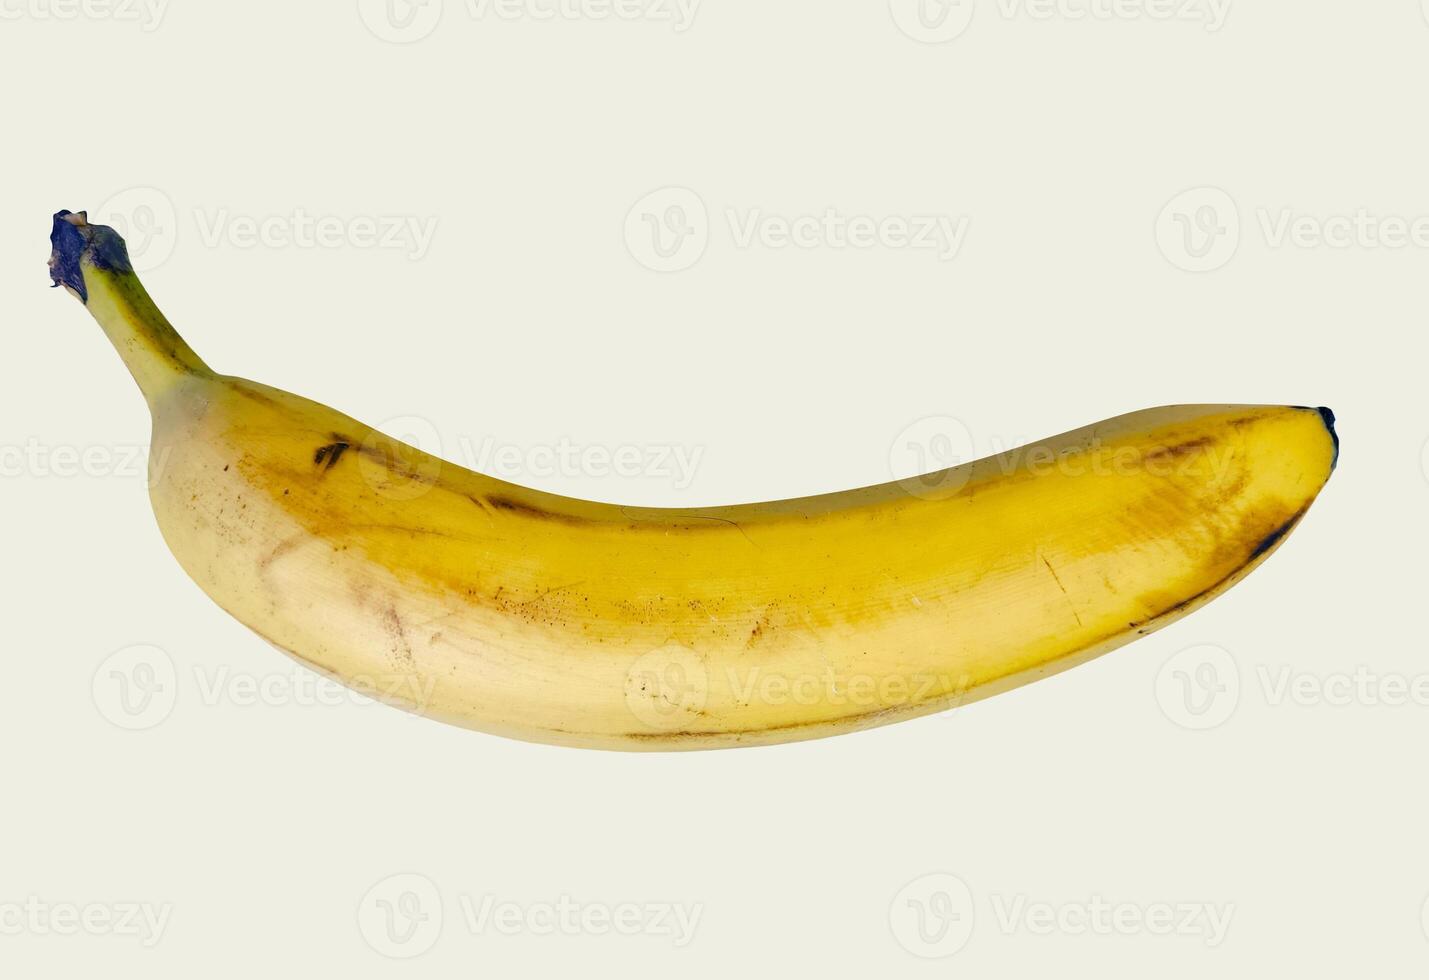 Ripe bananas. Exotic tropical yellow fruit. Banana symbol of health care and wellbeing. photo